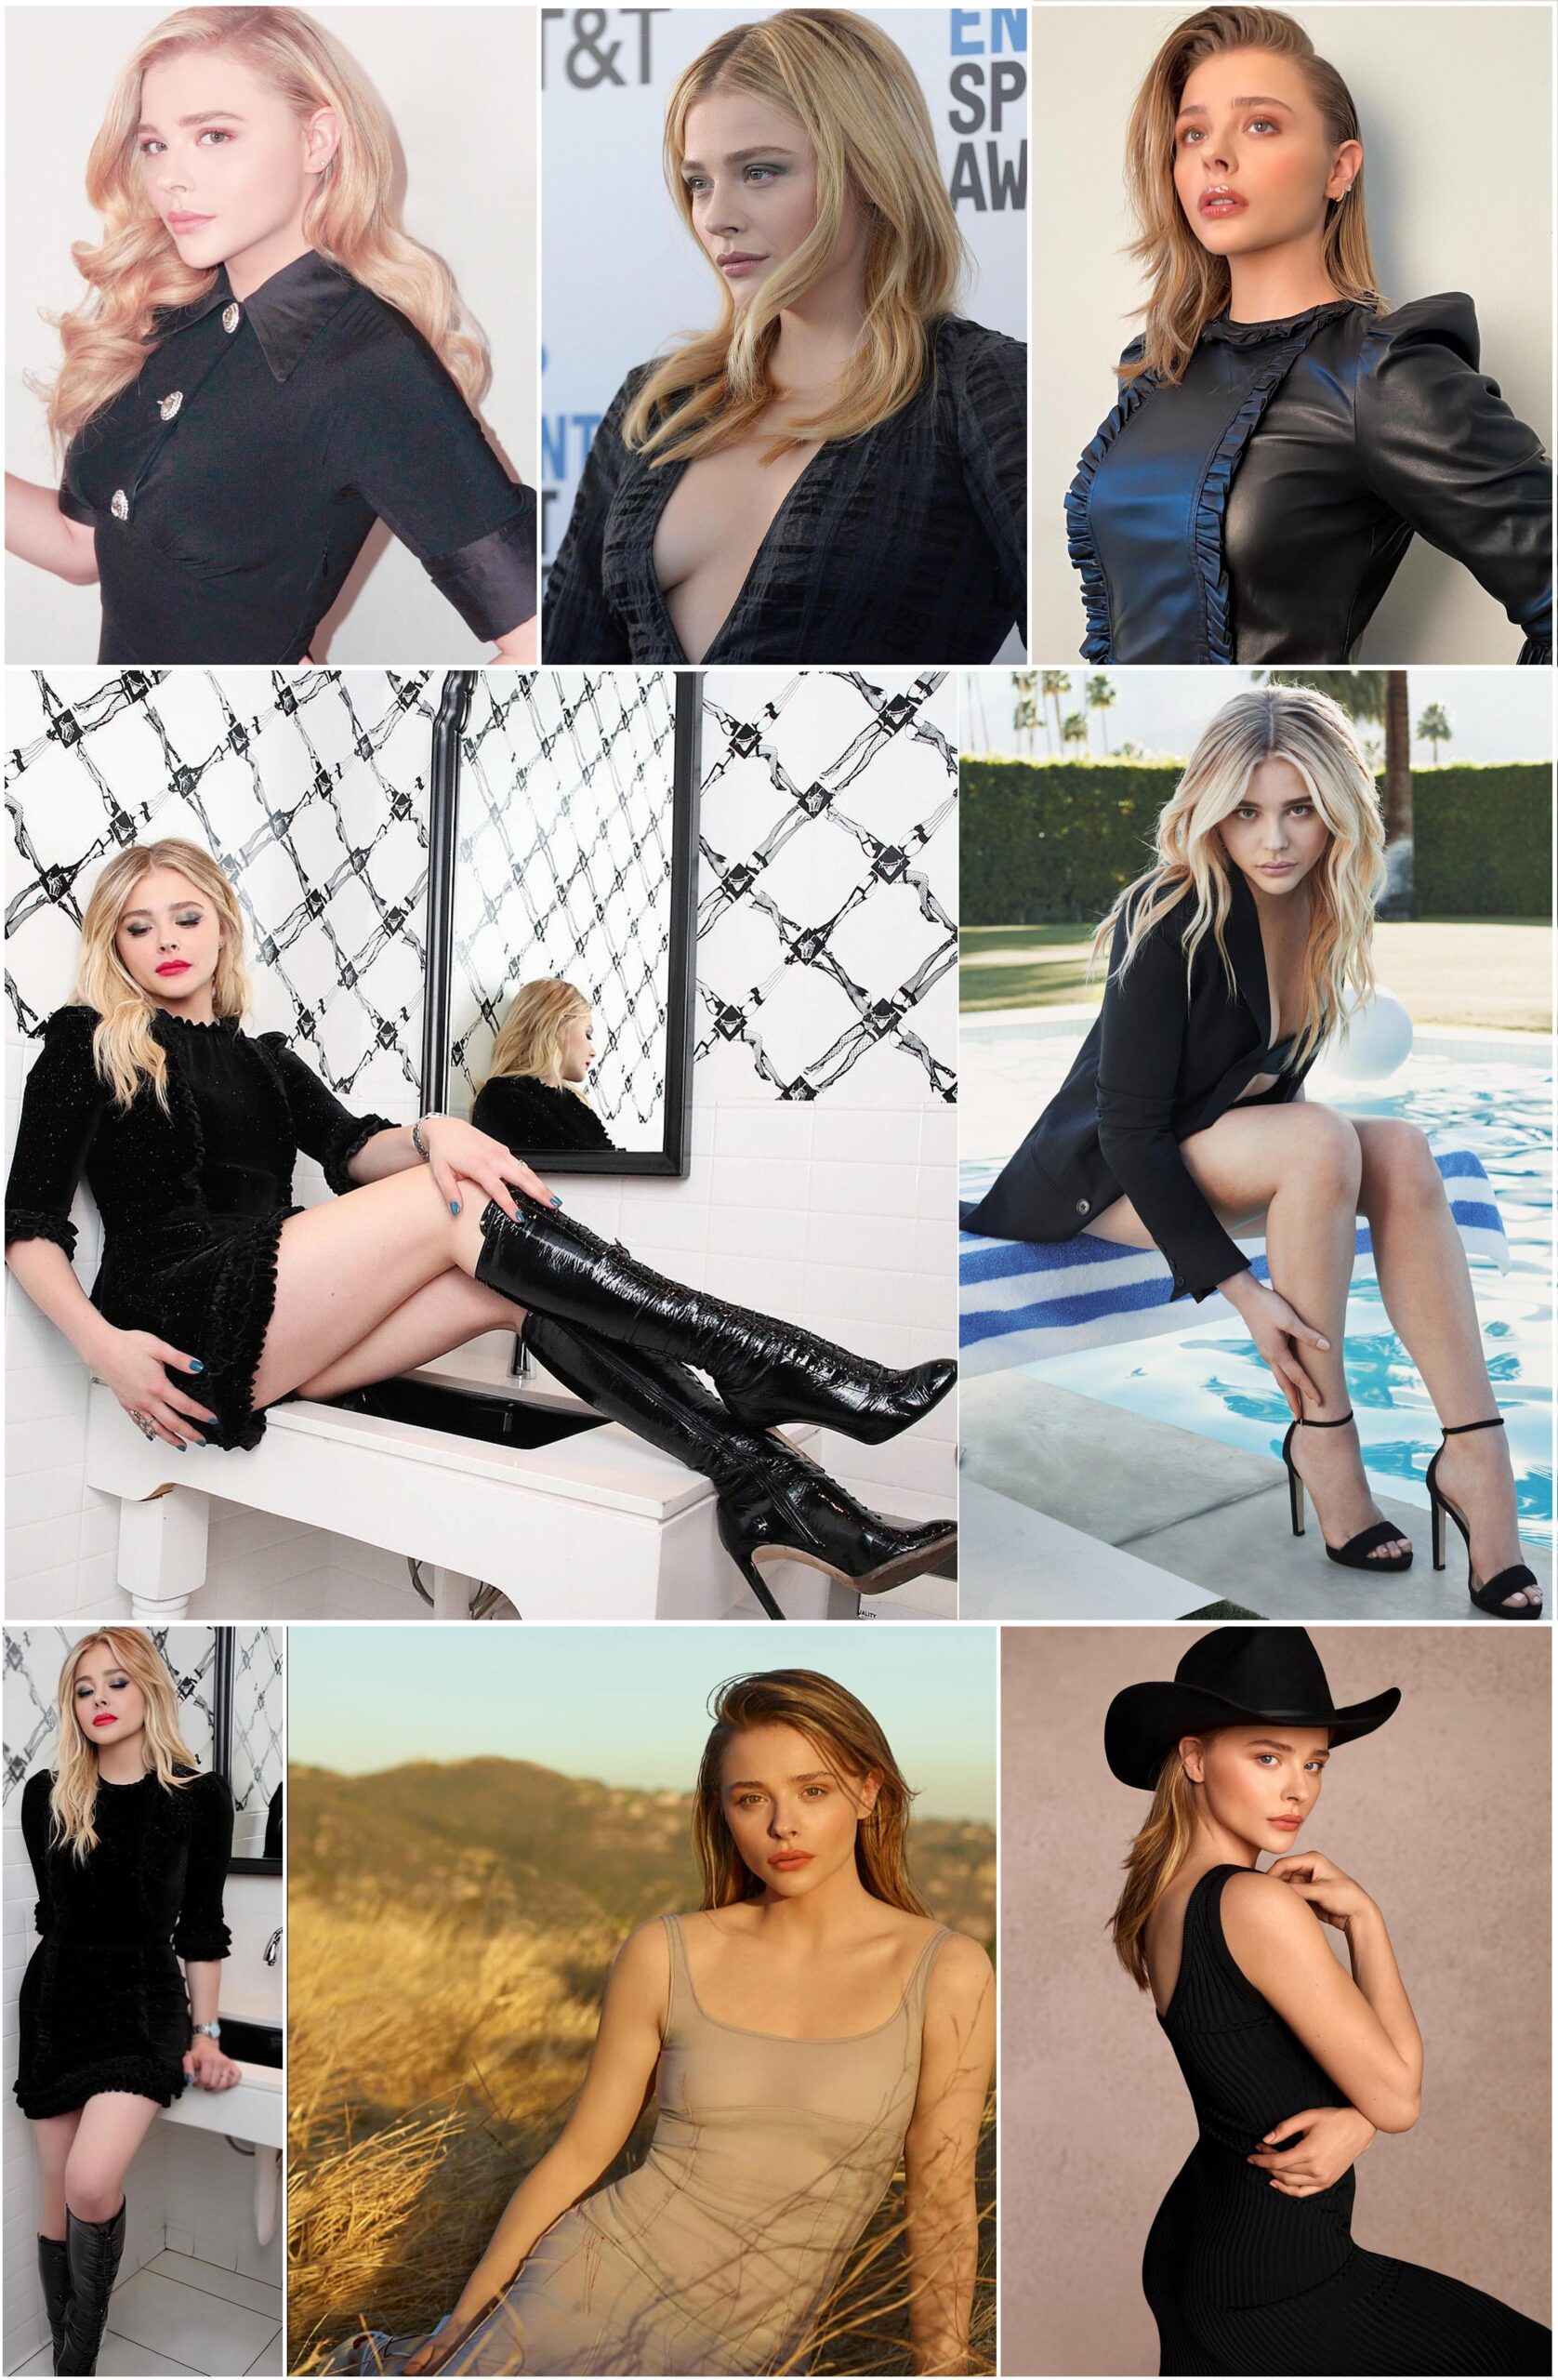 Pick a Kink for a night with Chloe Grace Moretz